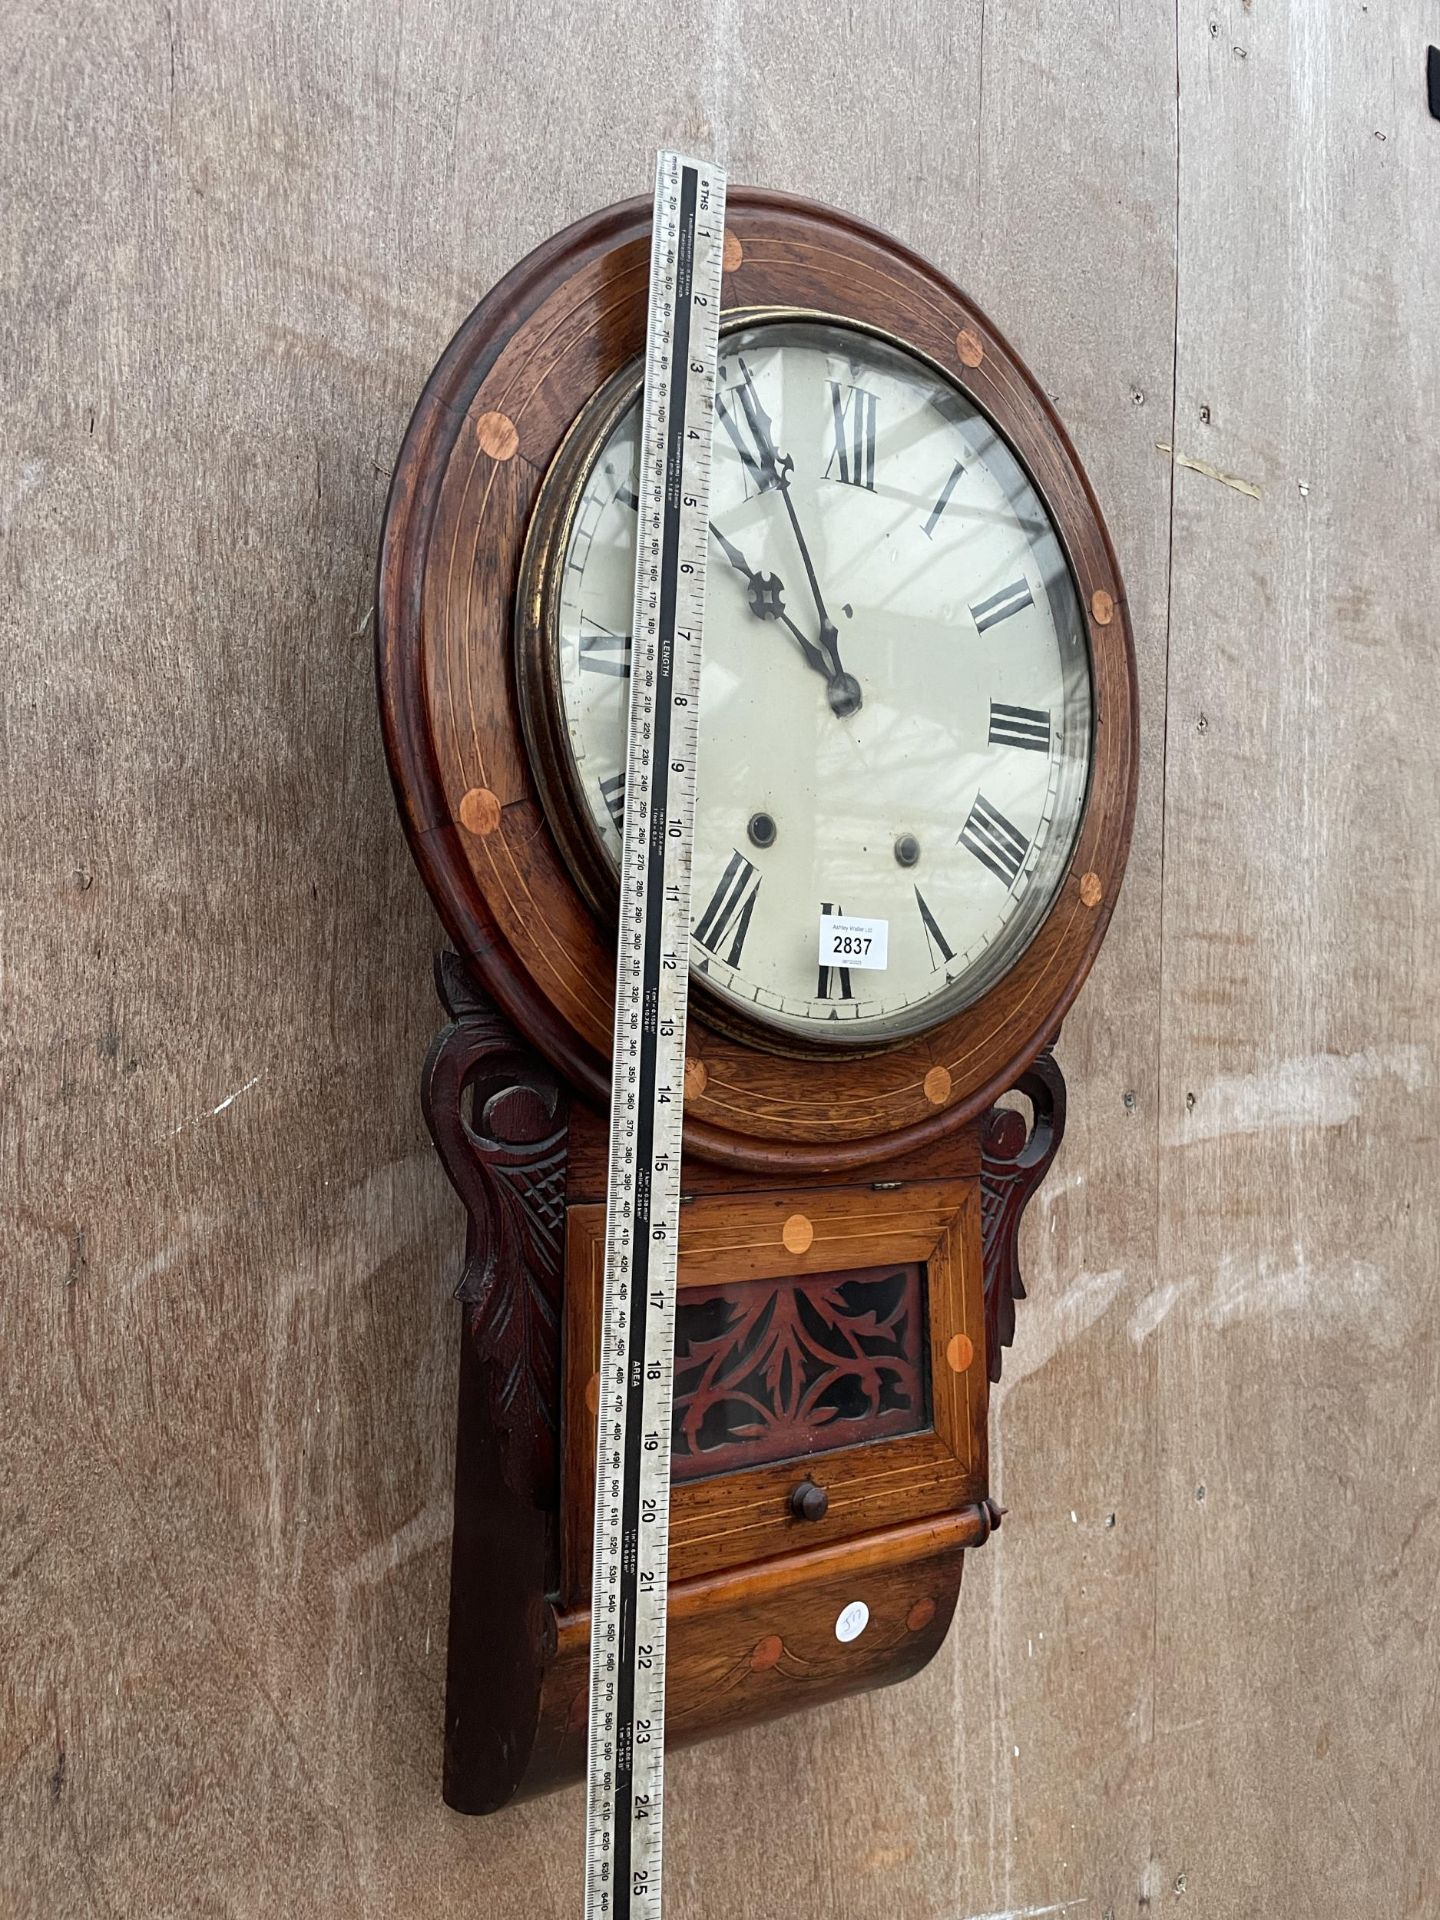 A VICTORIAN EIGHT-DAY WALL CLOCK WITH ENAMEL DIAL AND ROMAN NUMERALS - Image 4 of 4